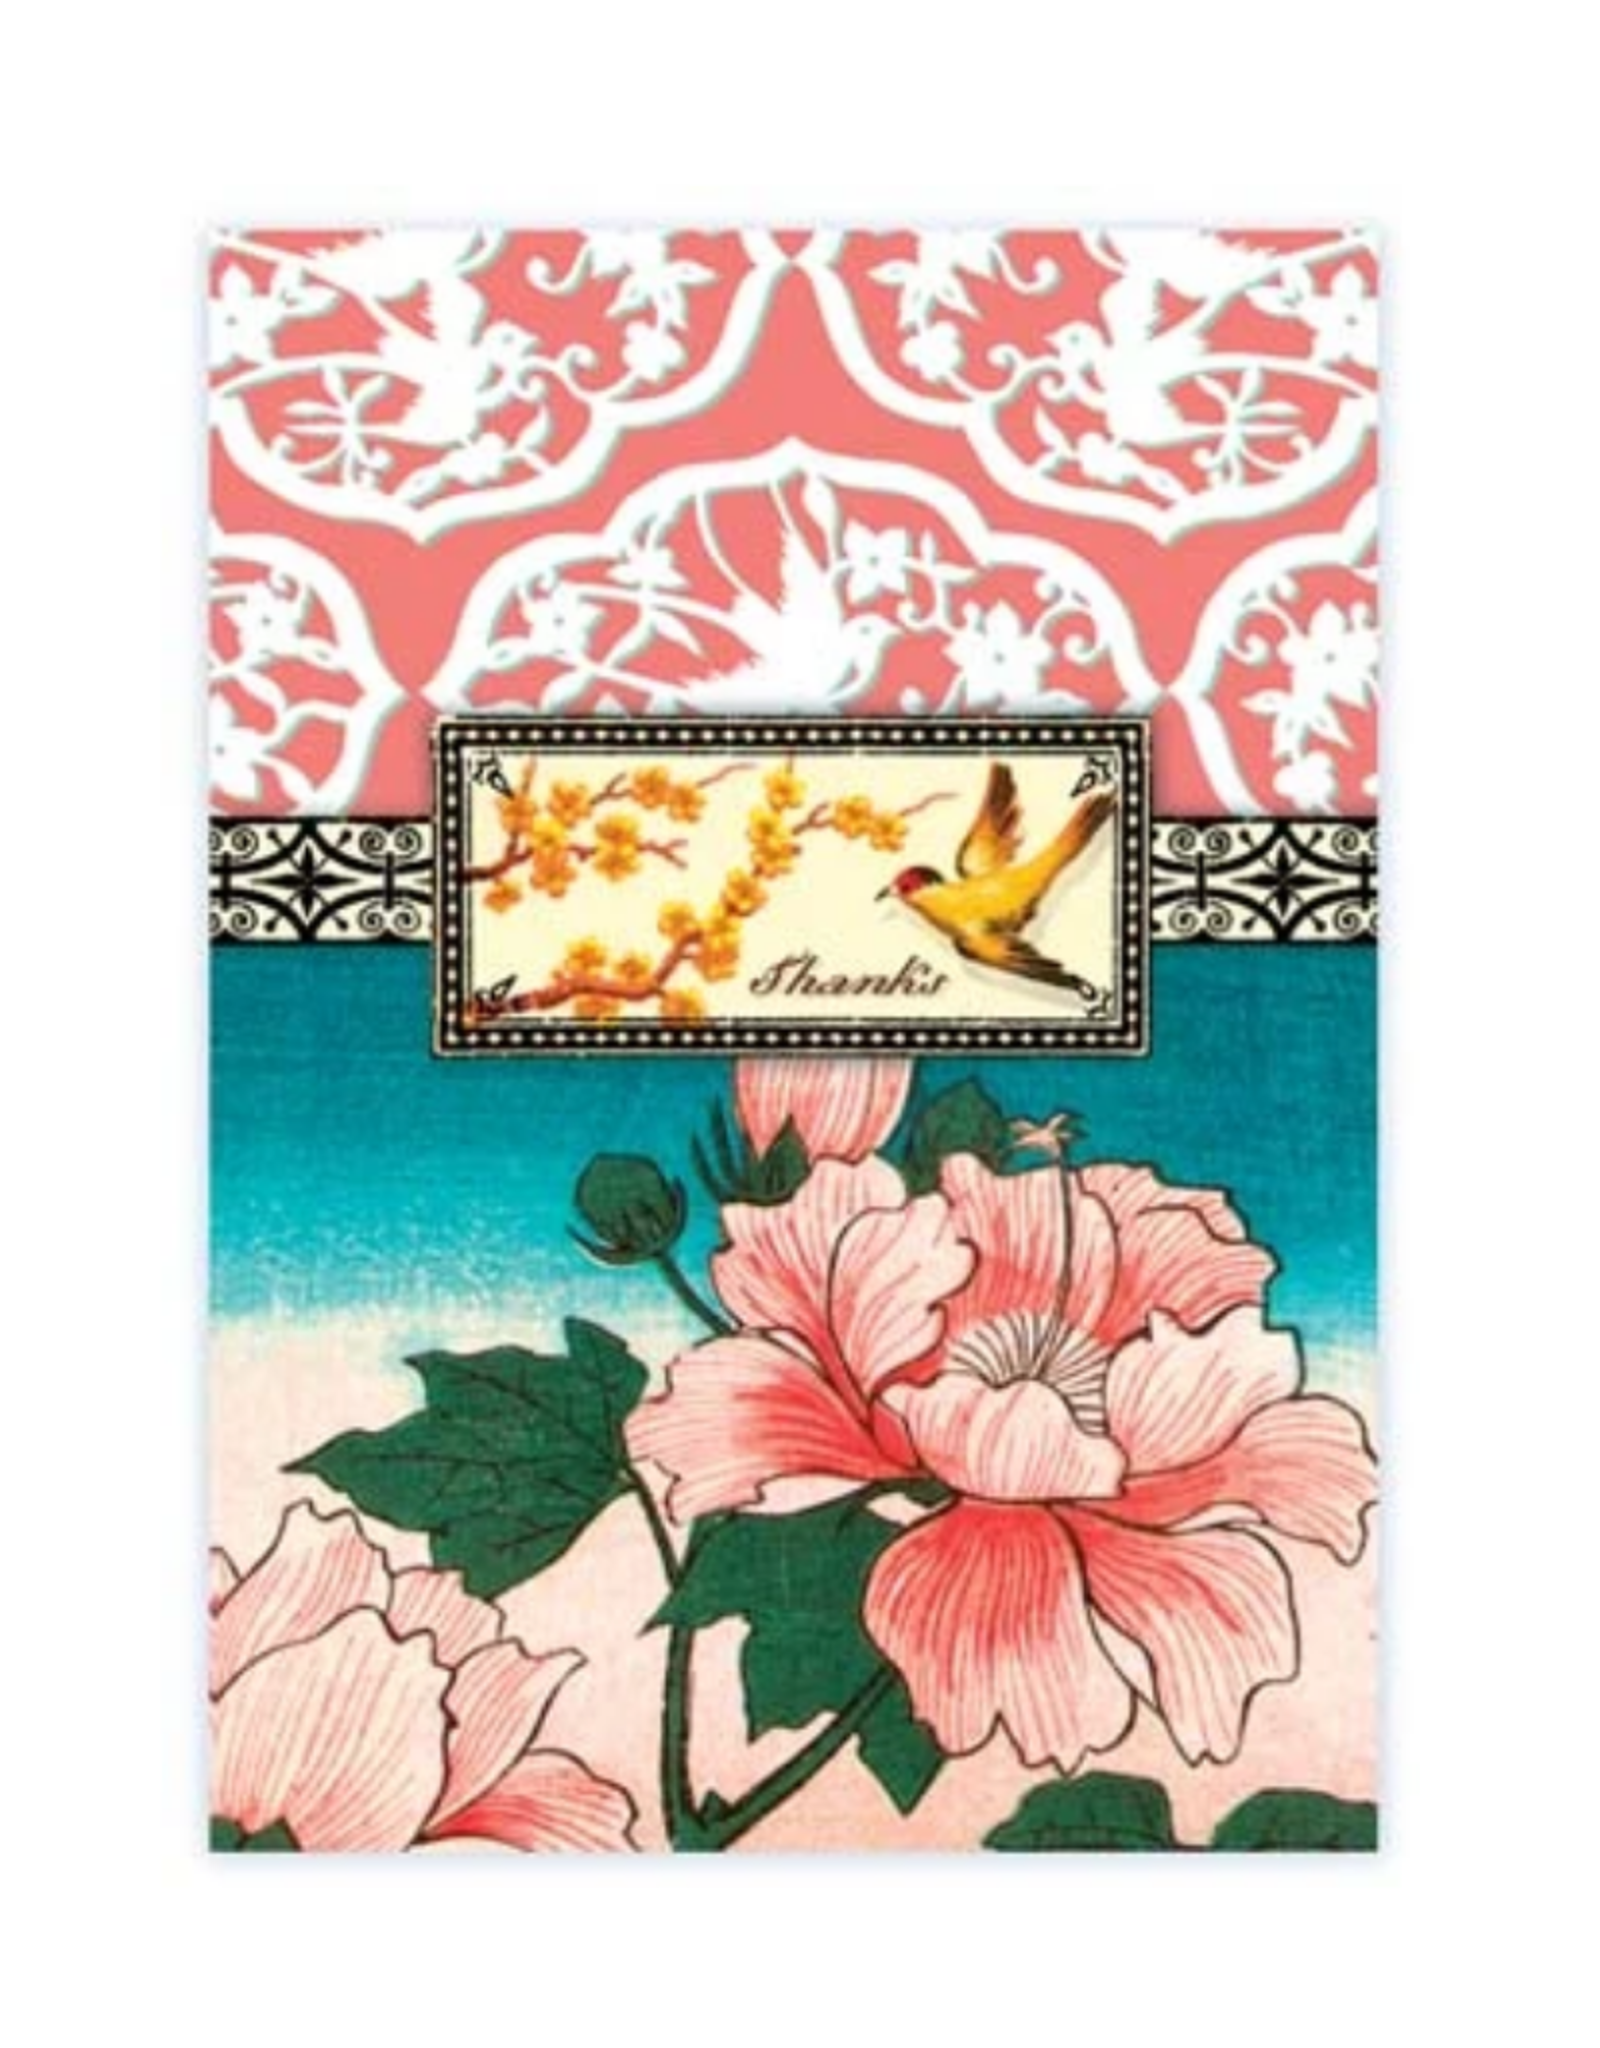 CARD-JUST BECAUSE "THANKS" FLORAL W/BIRD